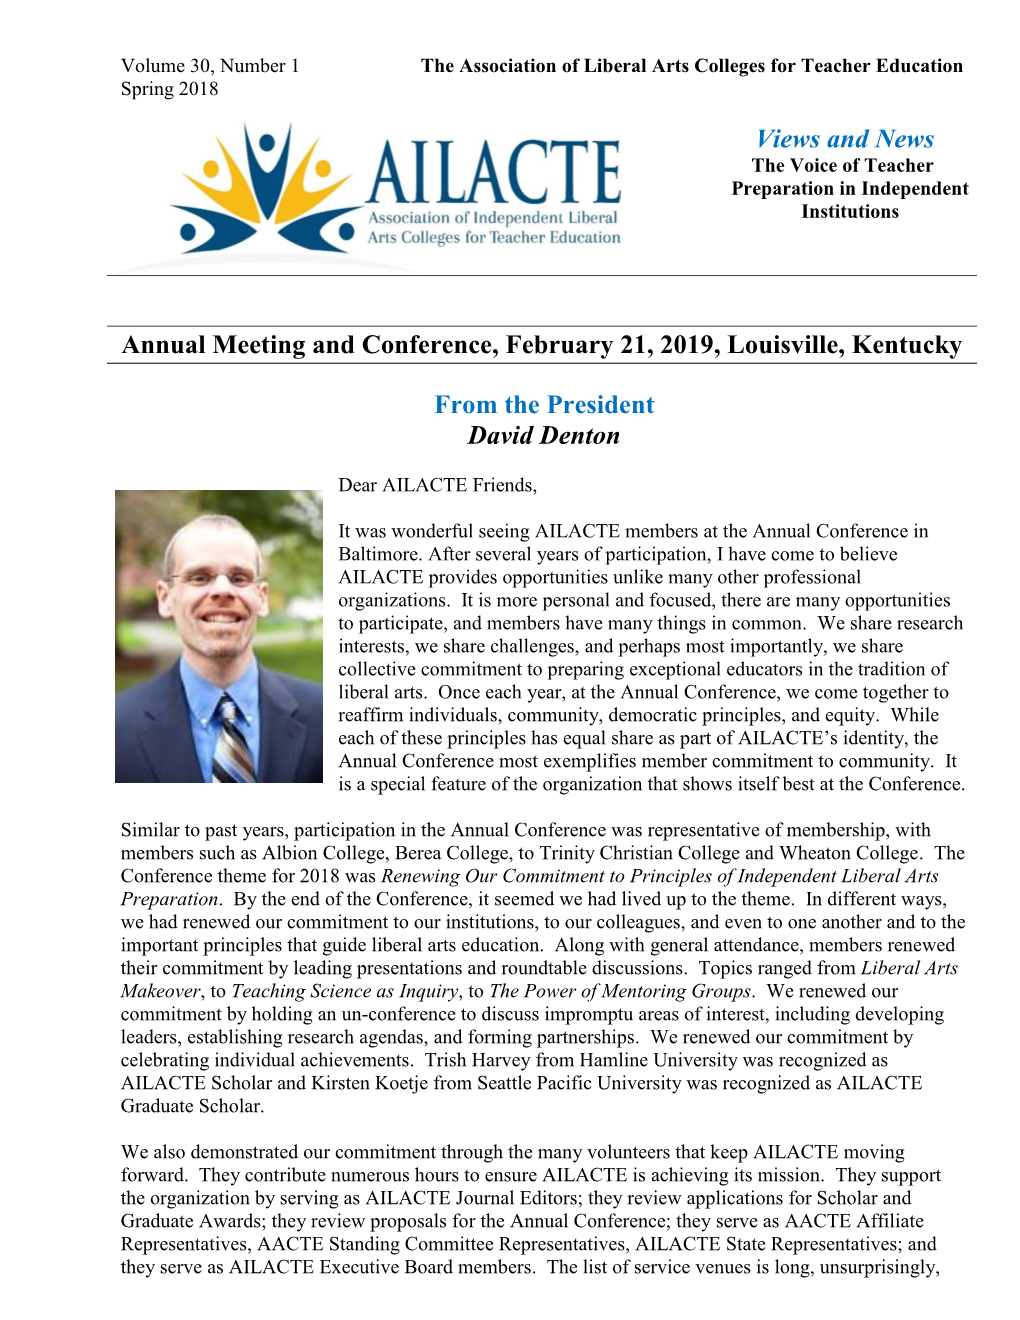 Views and News Annual Meeting and Conference, February 21, 2019